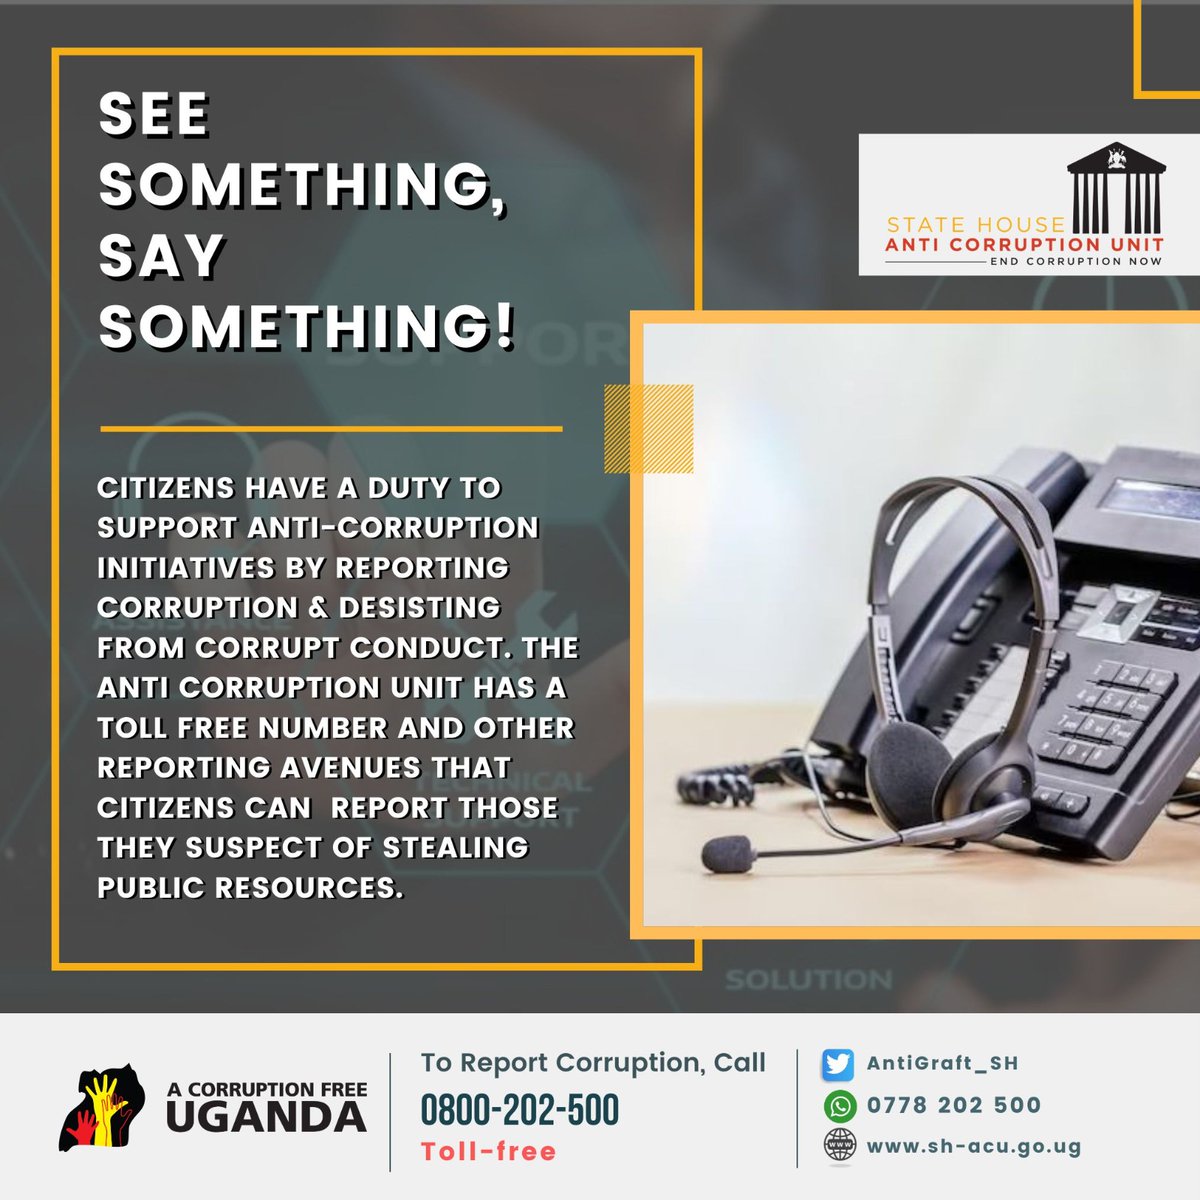 A corruption free #Uganda starts with us all, that is why we call upon fellow citizens, if you #SeeSomethingSaySomething please.
Let's #ExposeTheCorrupt and report them to @AntiGraft_SH.
#SayNoToCorruption
#CorruptionIsWinnable